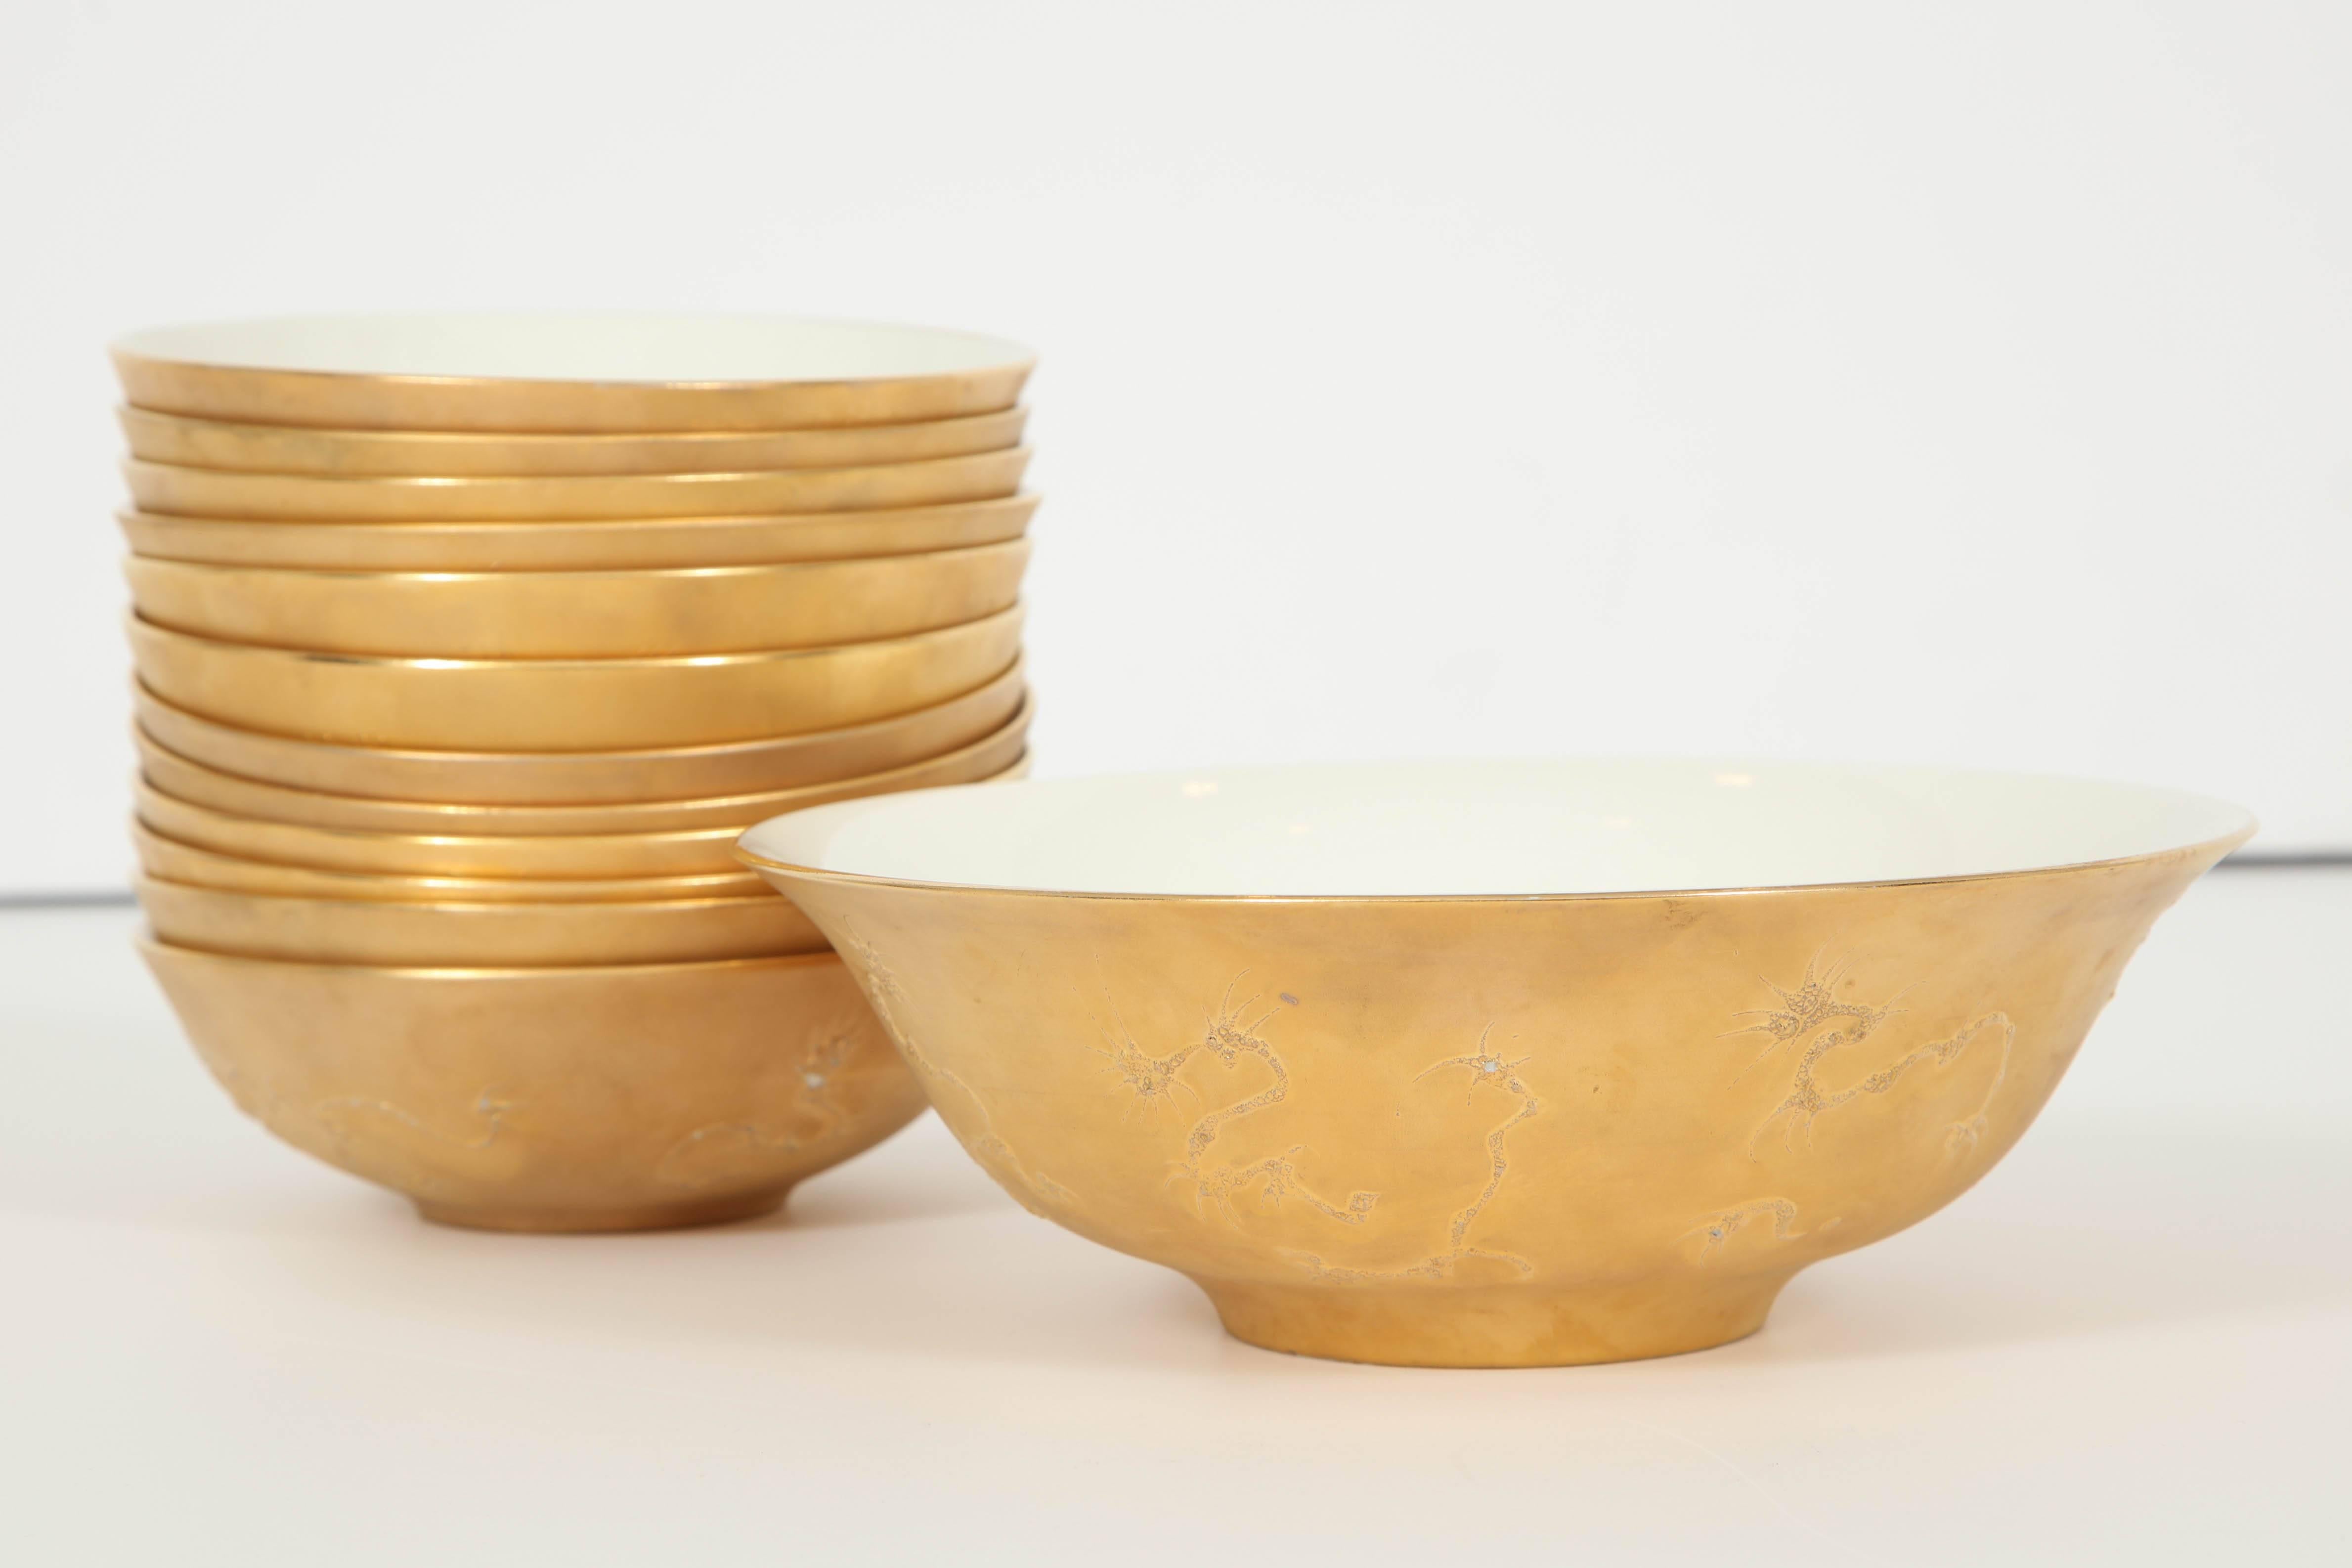 Beautiful set of 13 ceramic bowls with a rare gold finish and dragon design by Sasch Brastoff.
Larger bowl measures 9" in diameter.
12 smaller bowls measure 6" in diameter.